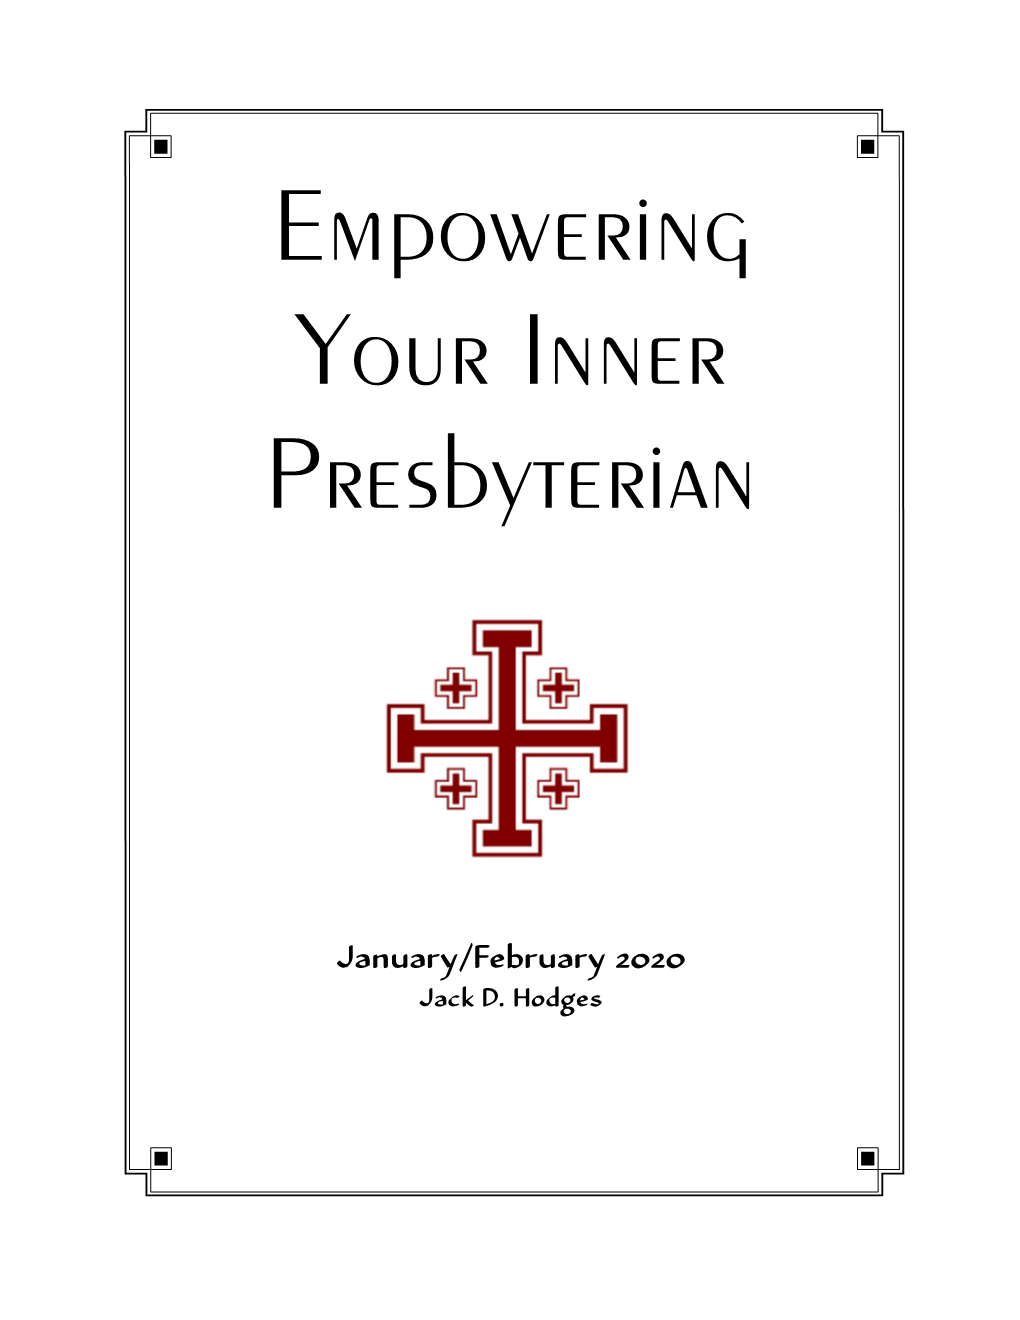 Booklet on Learn About Presbyterians